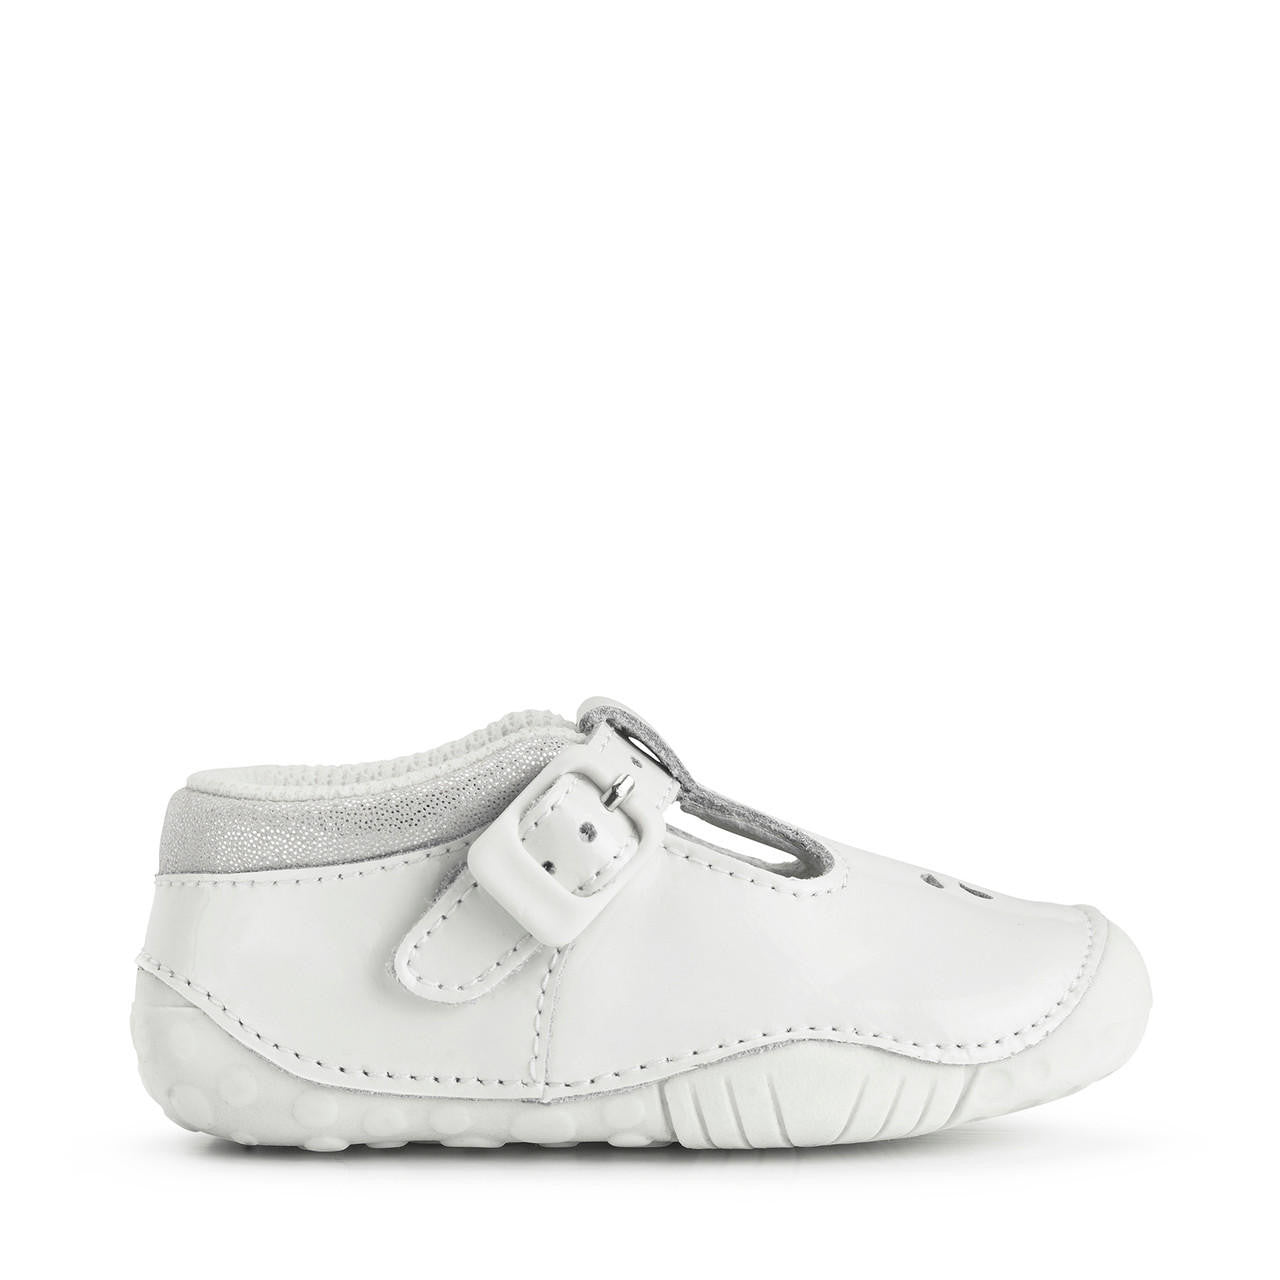 StartRite Baby Bubble 0773_14 Girls White Patent Leather & Textile Buckle Shoes